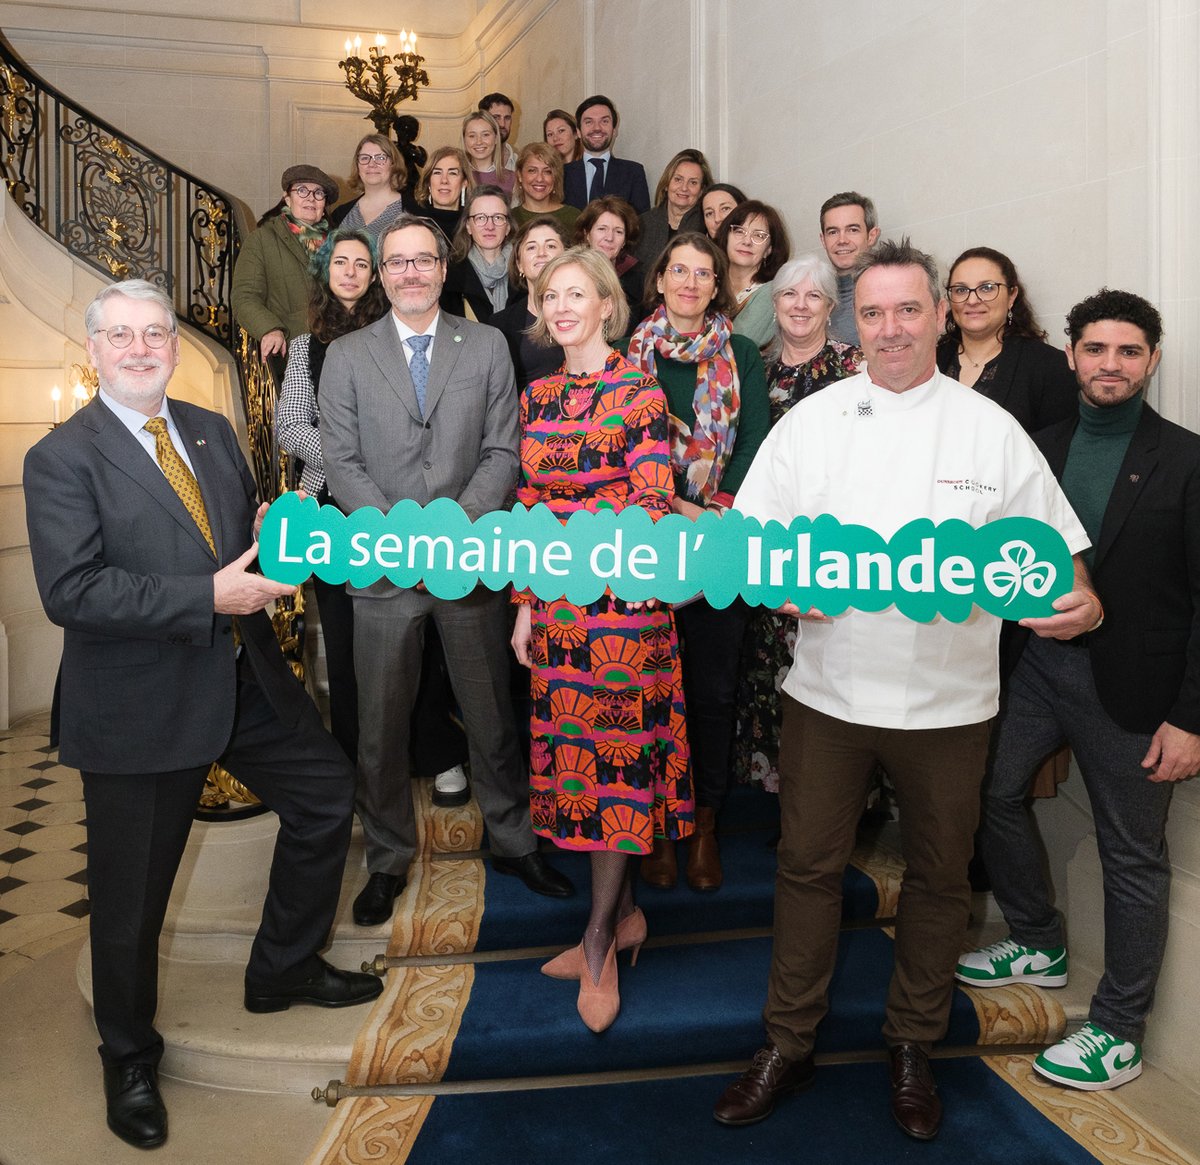 Today, our team in Paris unveiled details of the first ever Ireland Week in Paris to celebrate St Patrick’s Day - at an event attended by around 20 key French travel and lifestyle journalists.